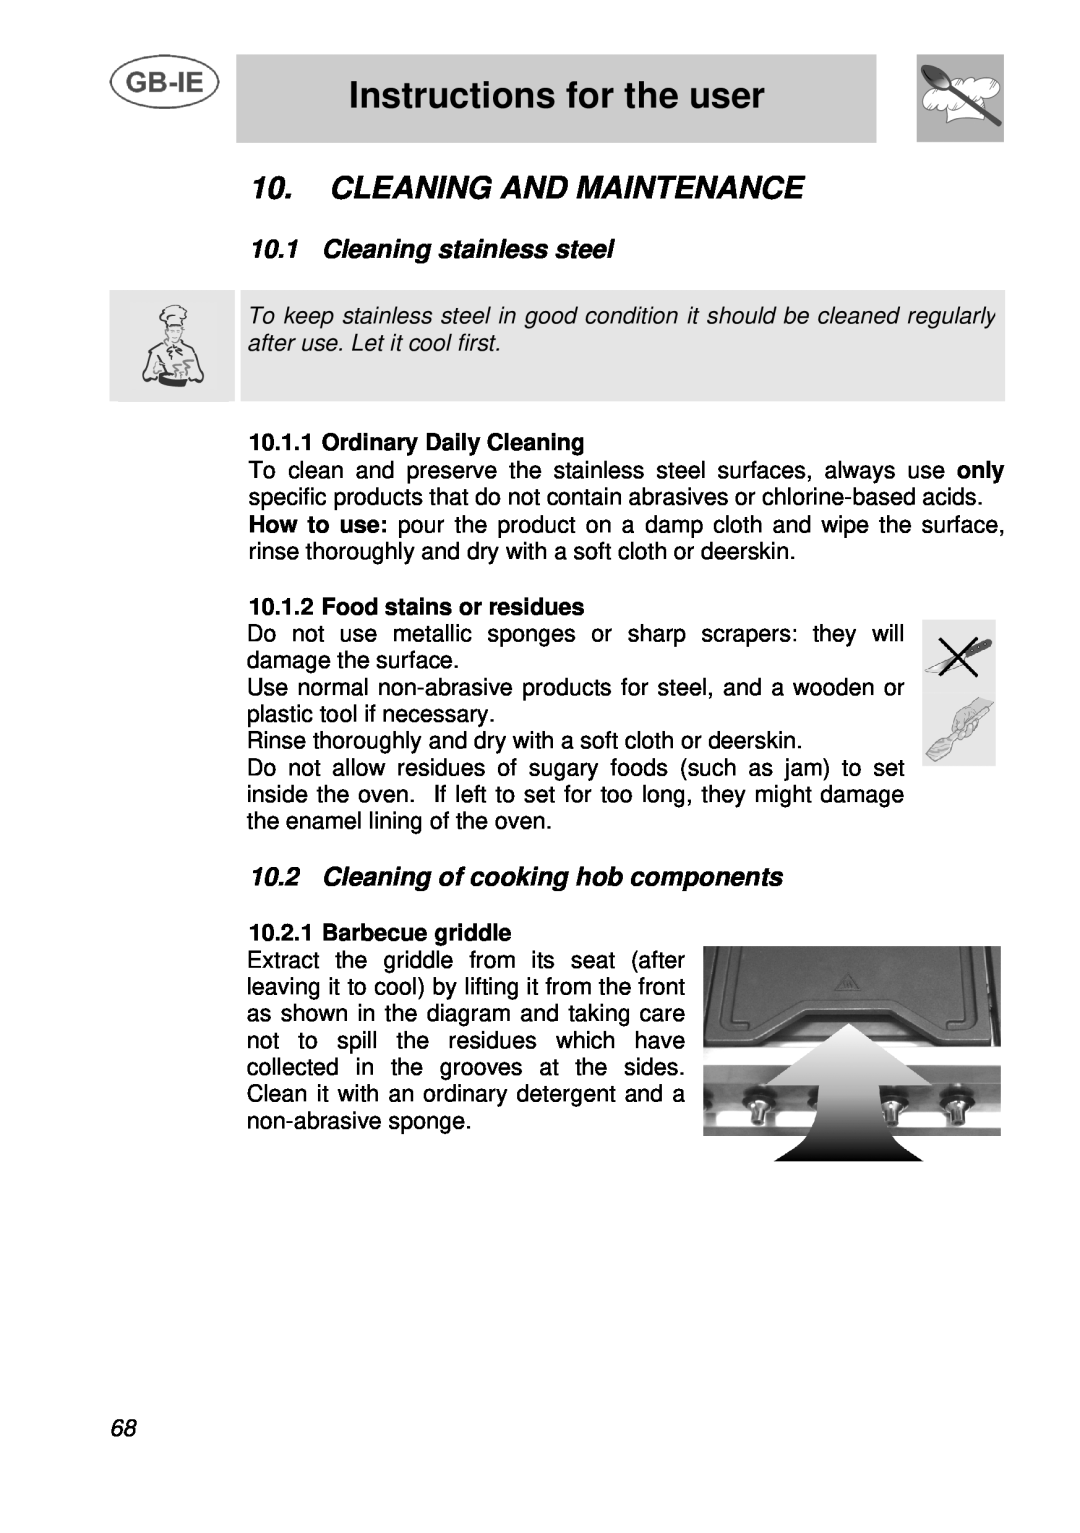 Smeg A3 Cleaning And Maintenance, Cleaning stainless steel, Cleaning of cooking hob components, Instructions for the user 